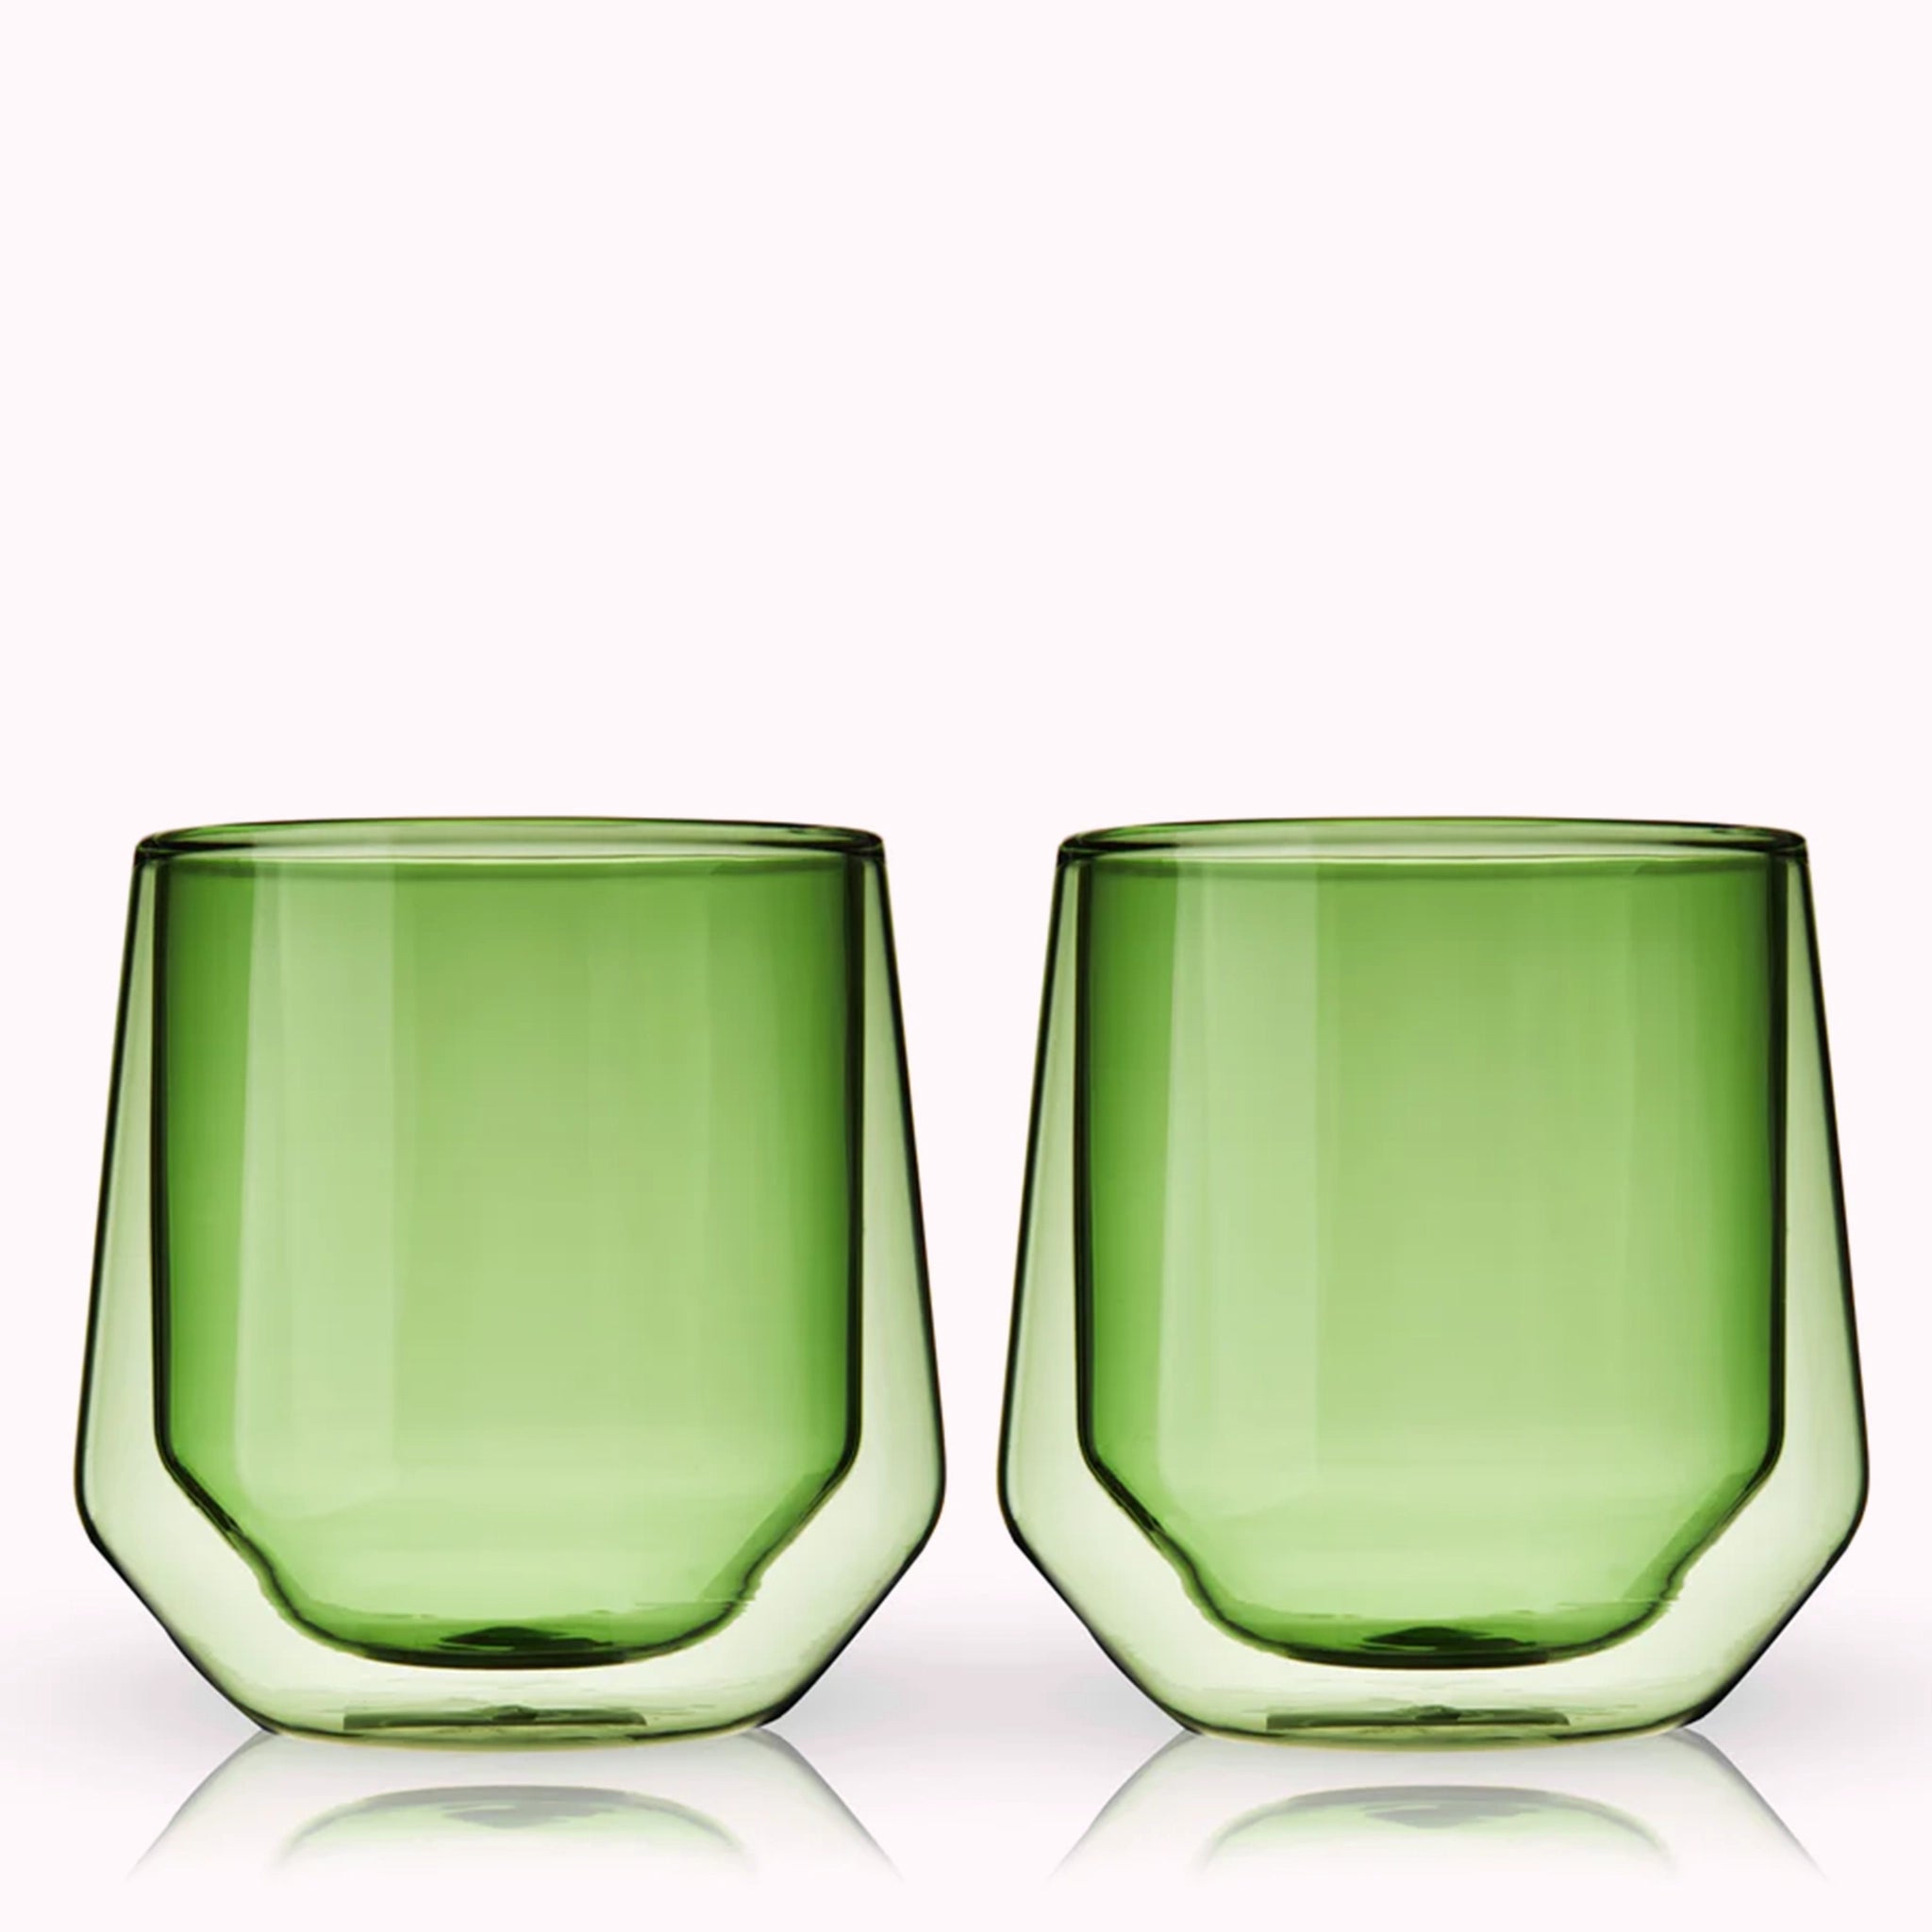 A set of two double walled glass tumbler cups in a green color photographed in front of a white background.